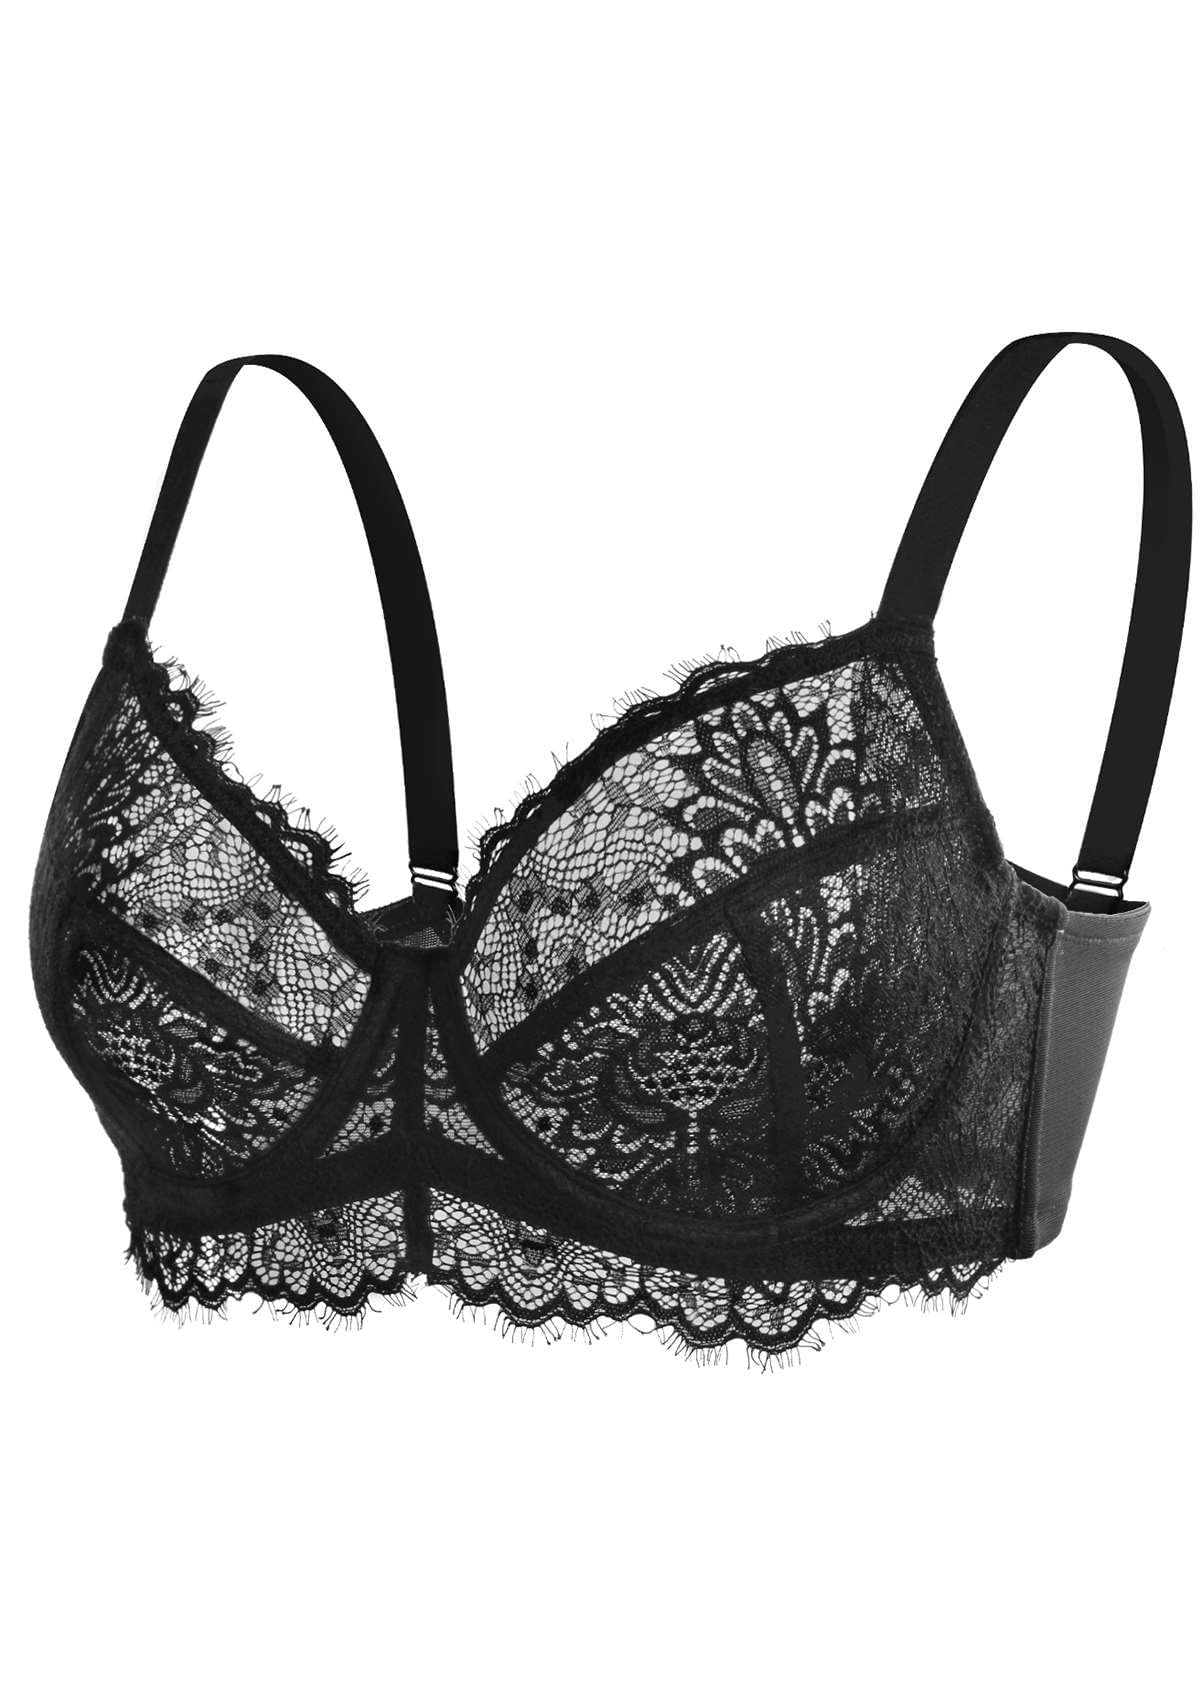 HSIA Sunflower Underwire Lace Bra: Unlined Full Coverage Support Bra - Black / 48 / D